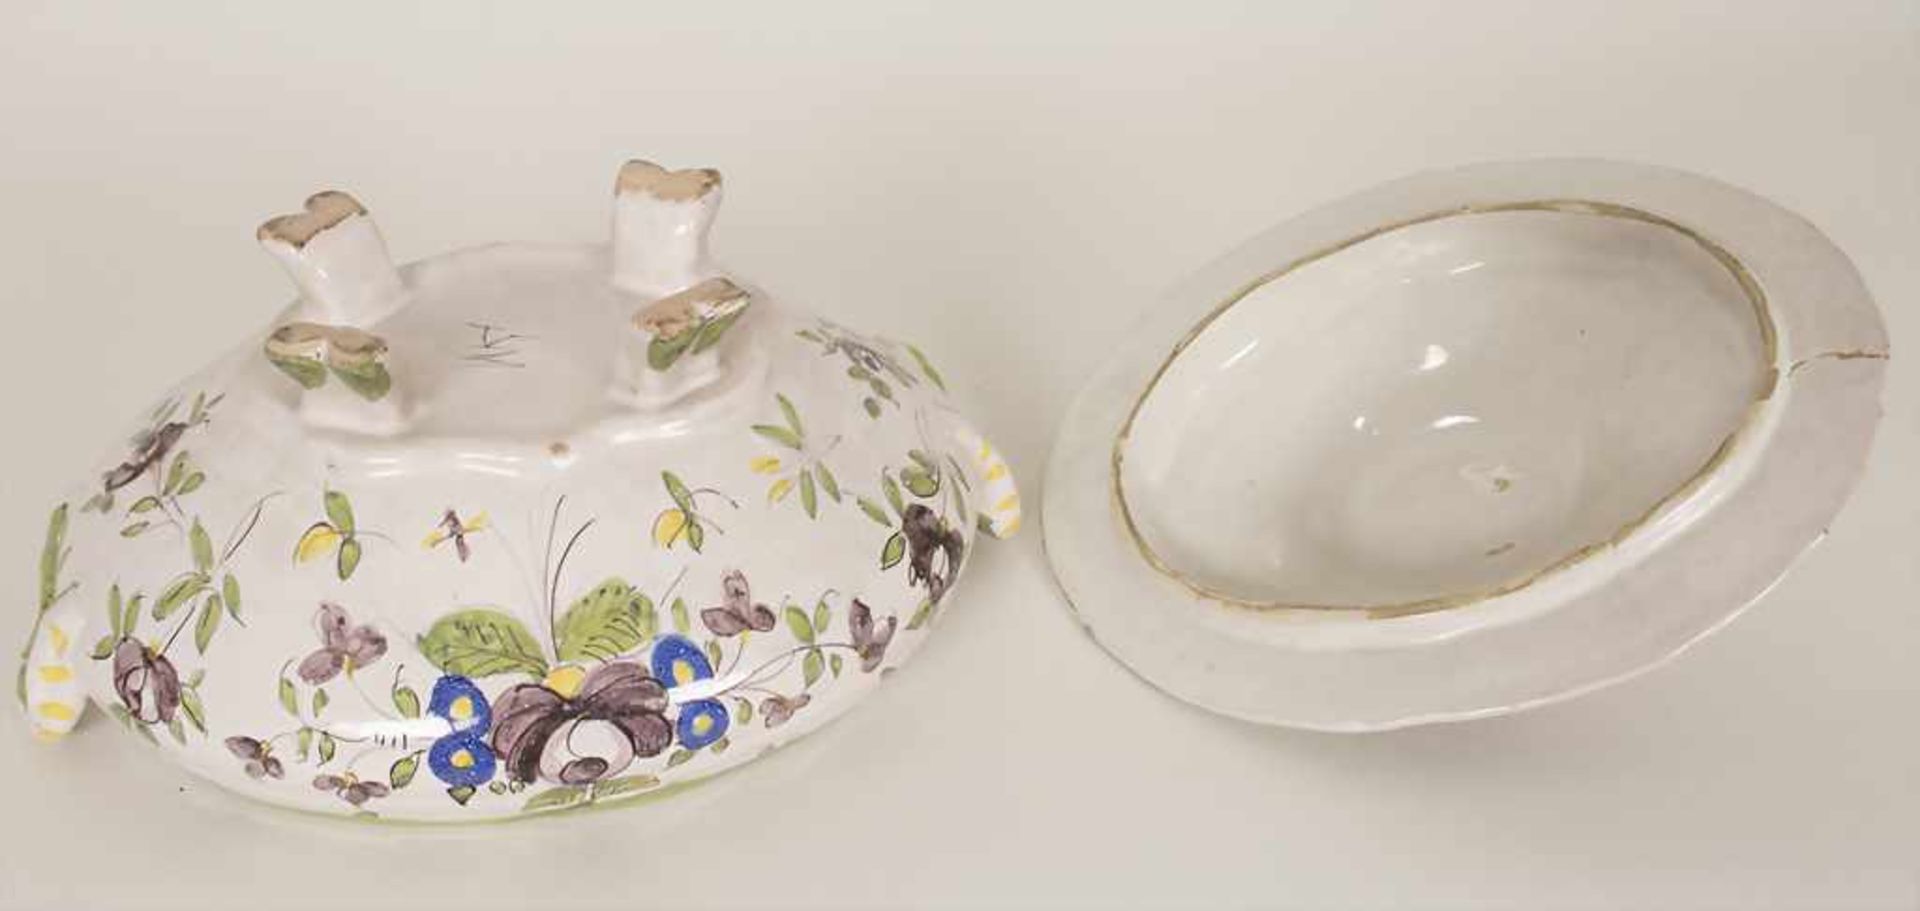 Fayence-Deckelterinne / A faience covered tureen, 18./19. Jh.Material: Keramik, floral polychrom - Bild 6 aus 8